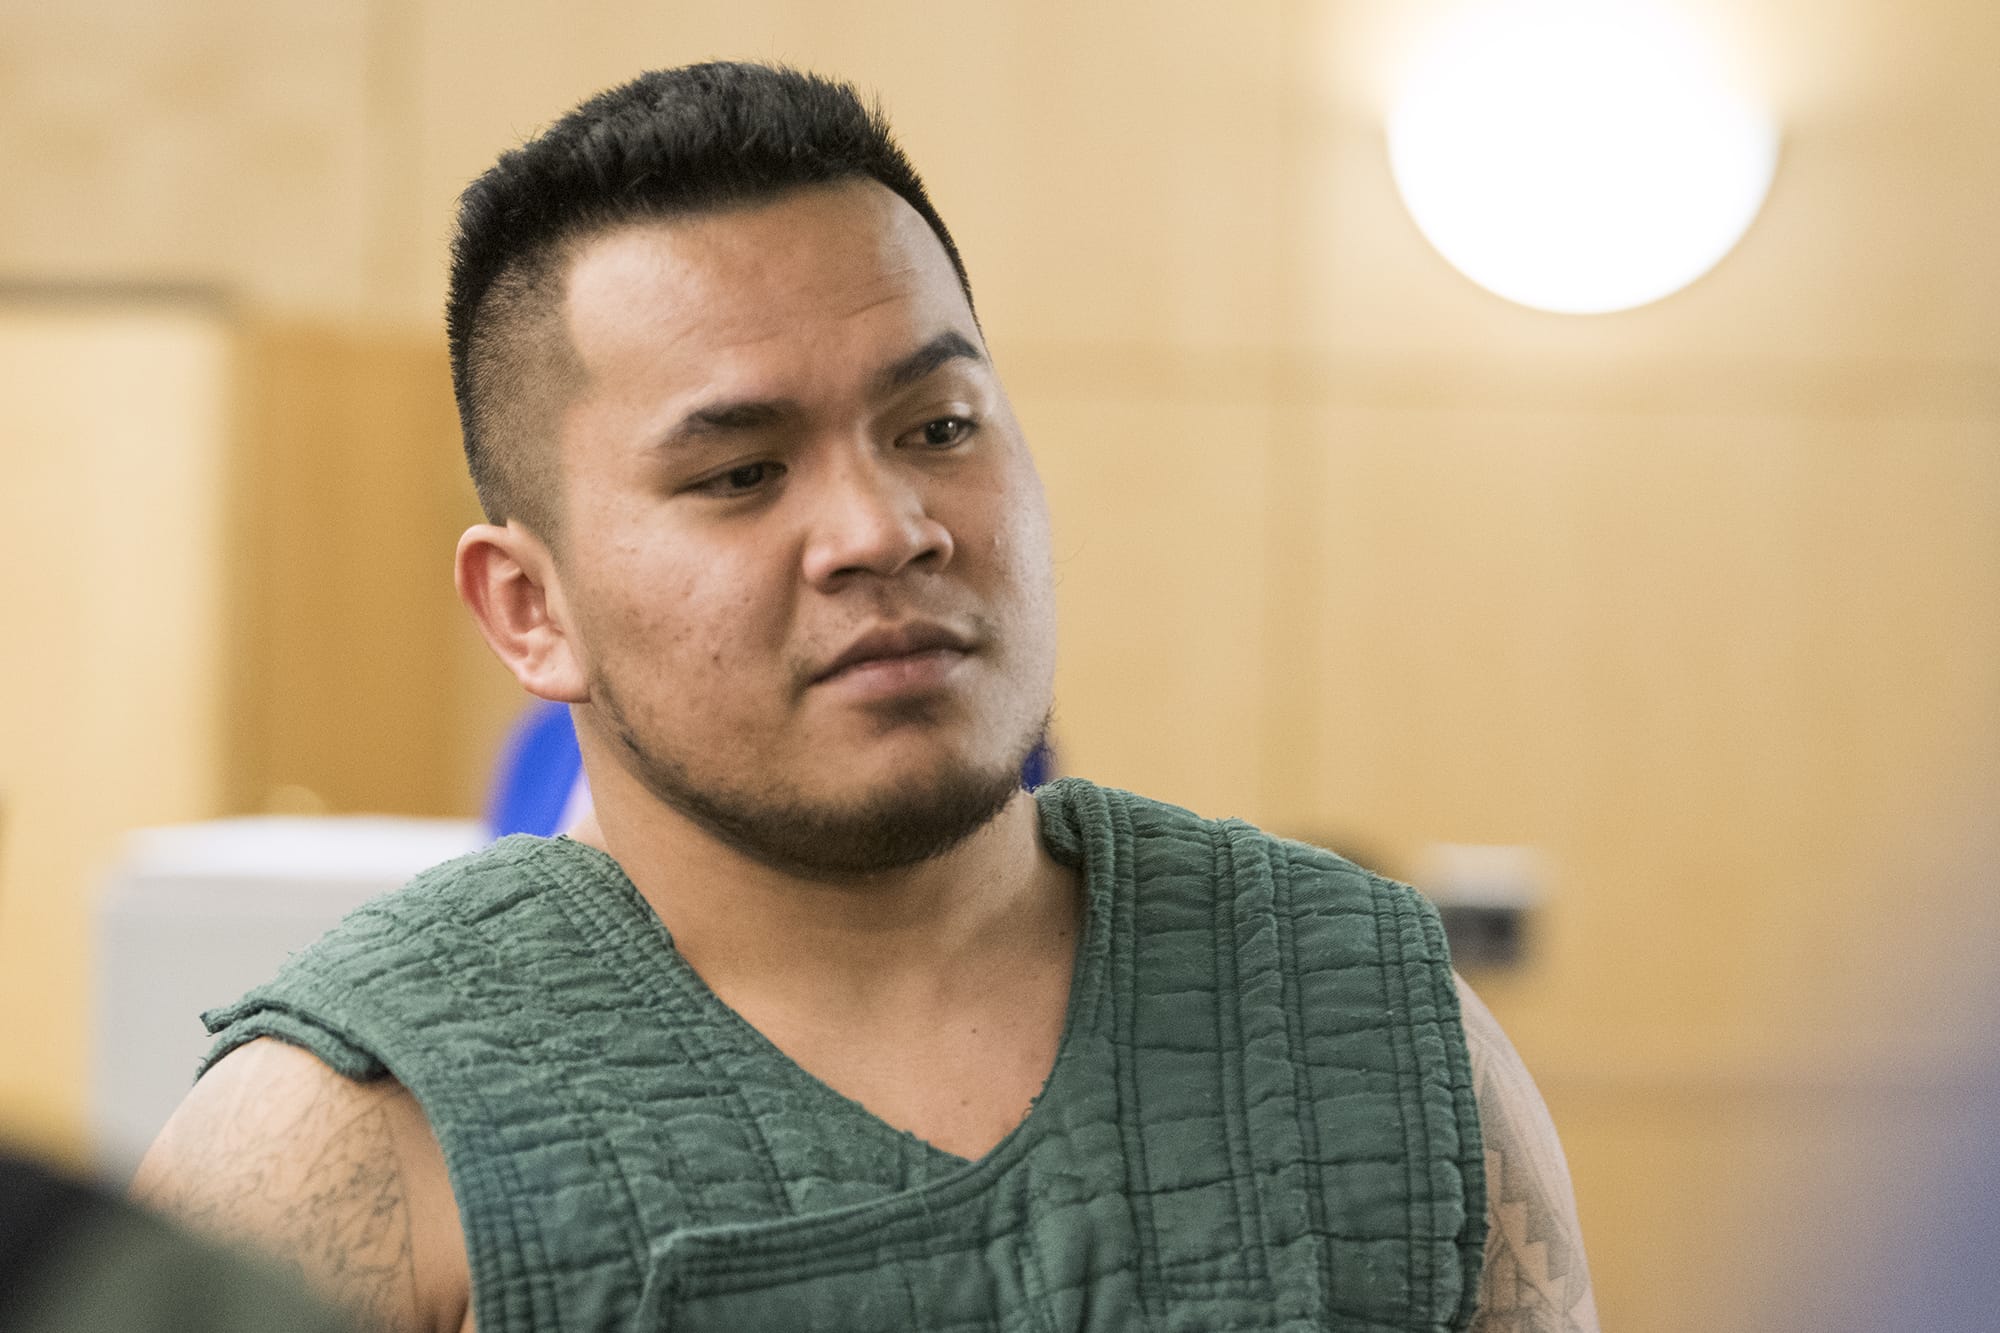 Charson Lotius, 24, makes a first appearance Monday in Clark County Superior Court stemming from a stabbing early Sunday morning at a Vancouver AM/PM. He pleaded not guilty Friday to first-degree murder and second-degree assault.